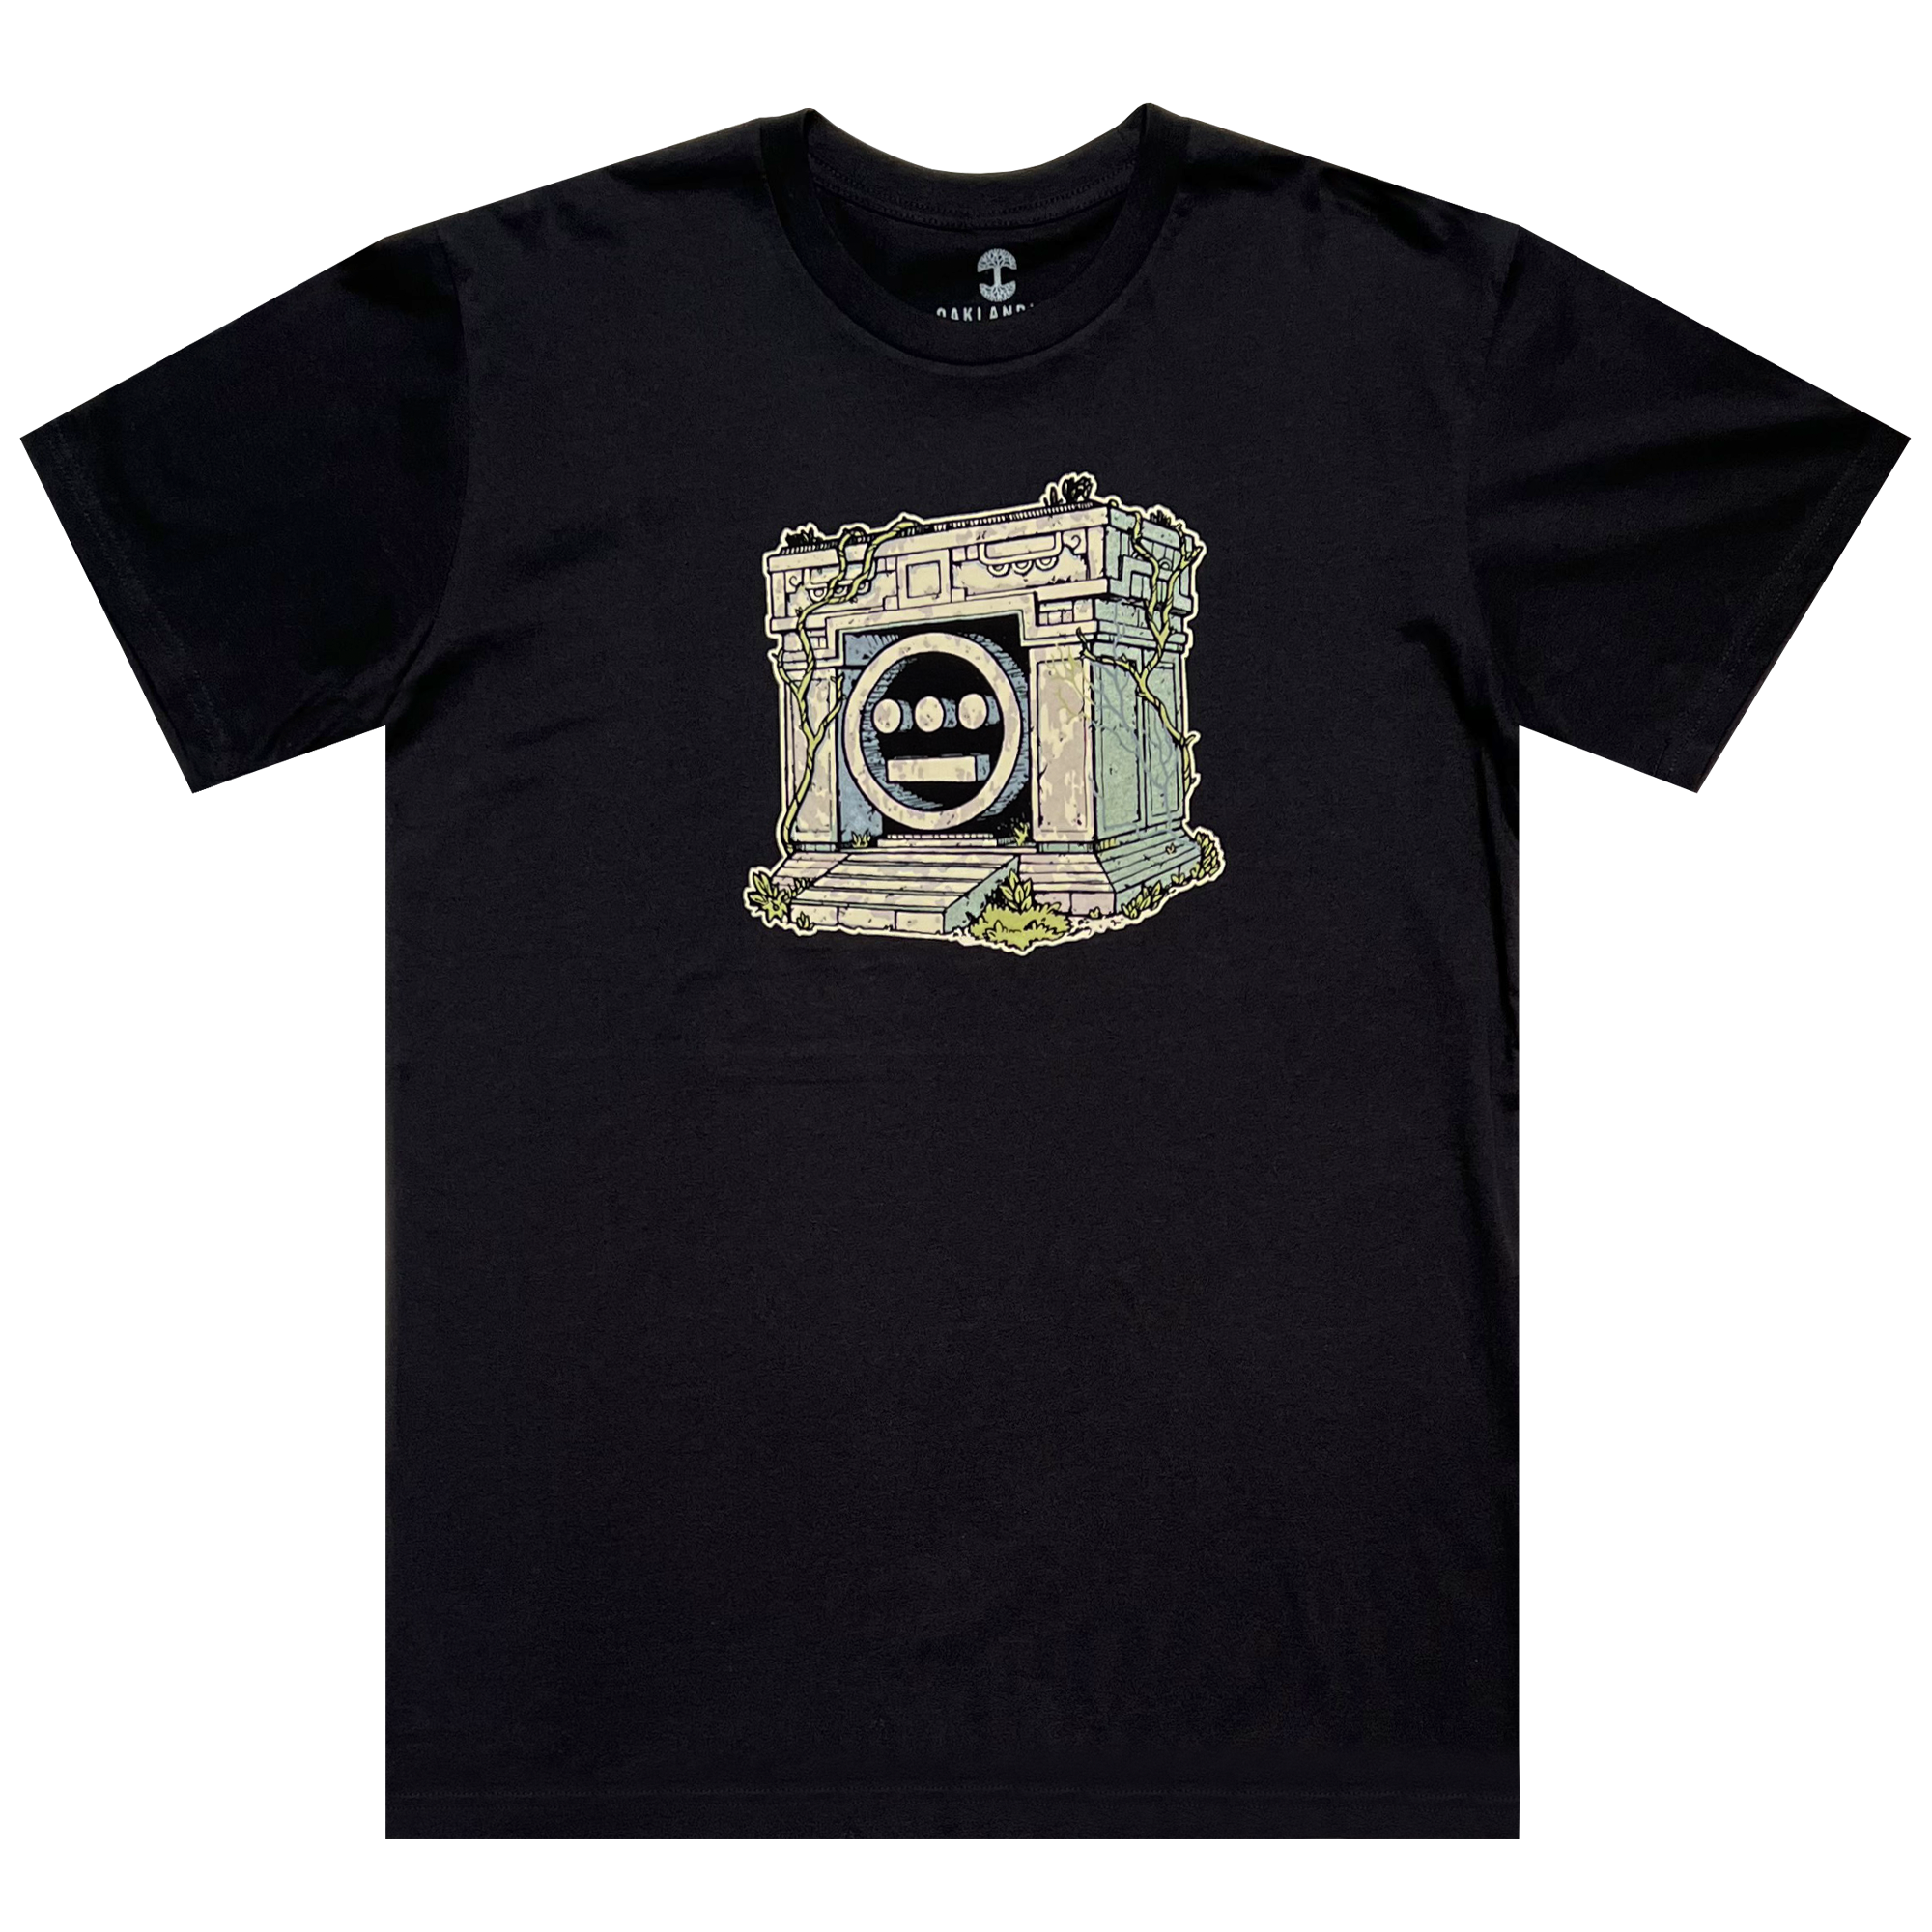 The front side of a black t-shirt with a graphic illustration of a crypt with the Hiero hip hop logo in the center.